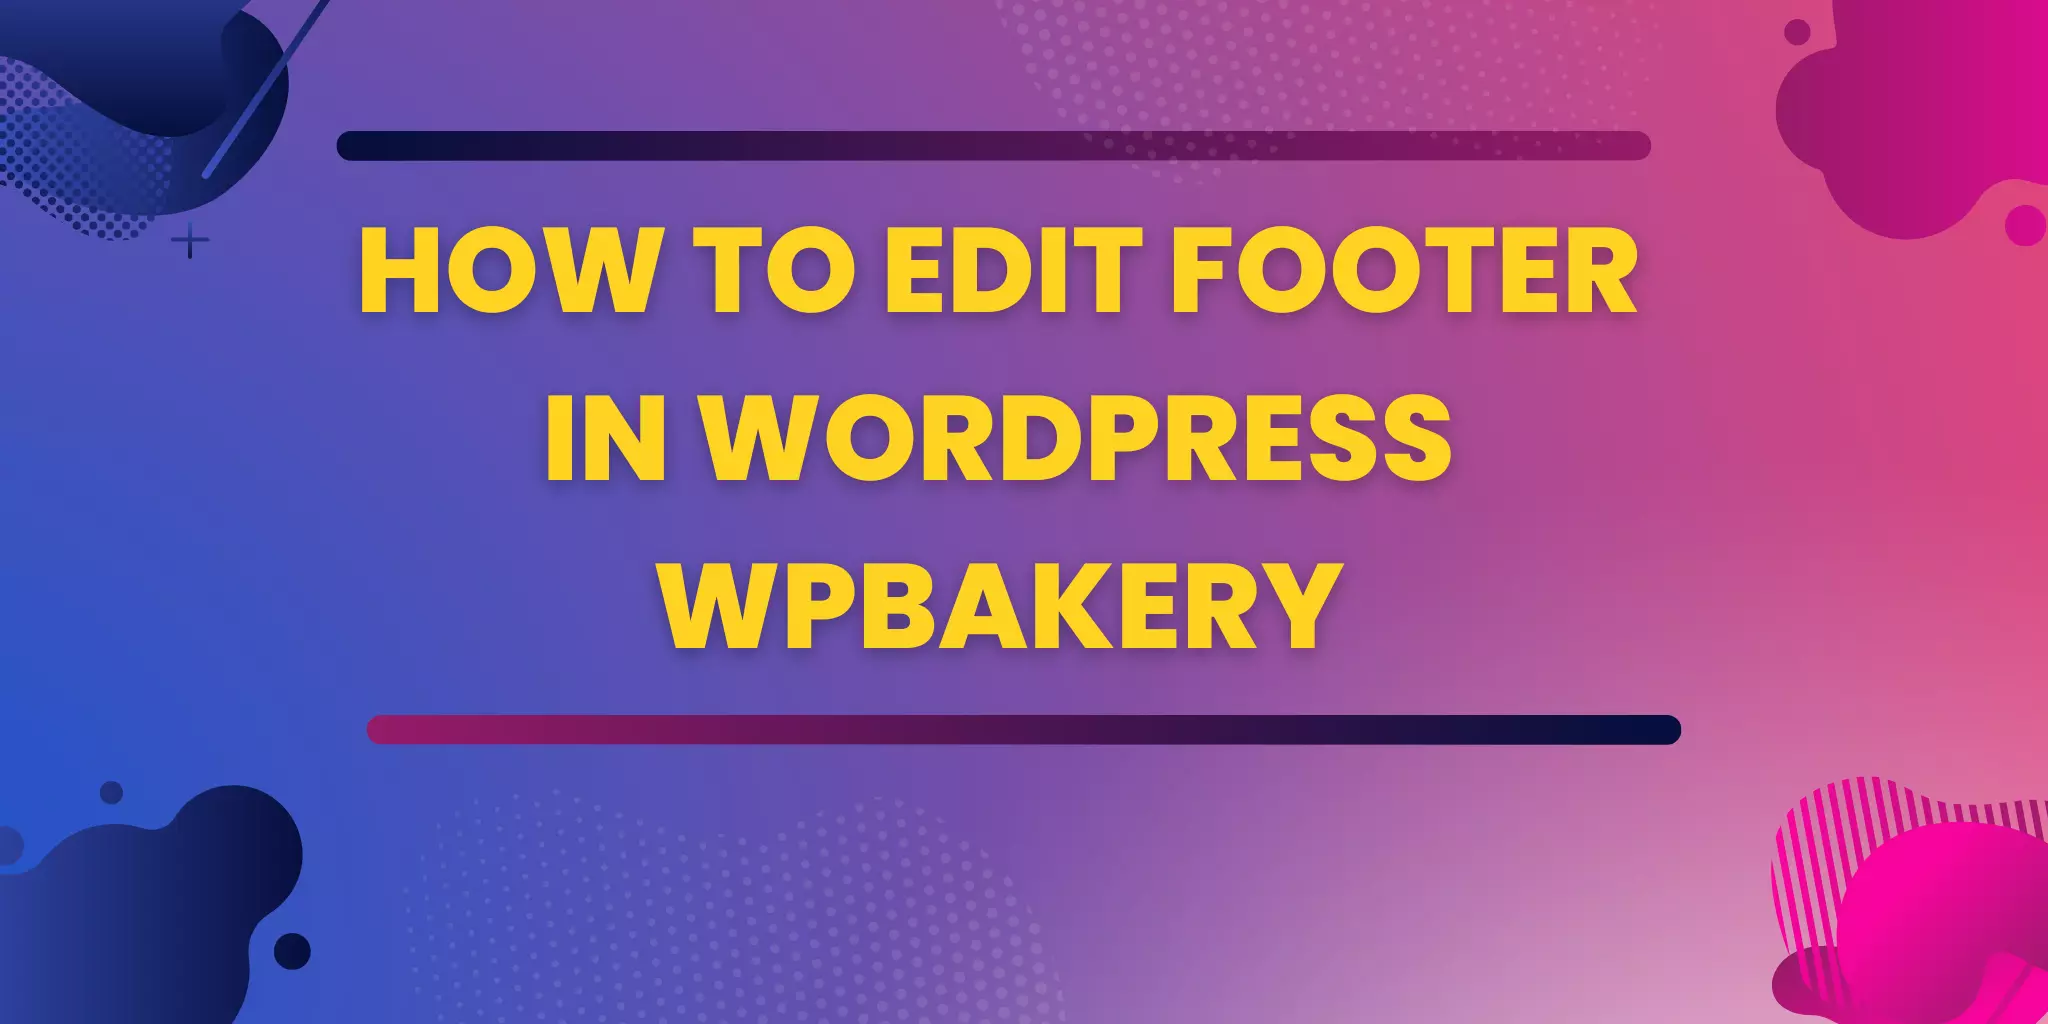 How to edit footer in WordPress Wpbakery